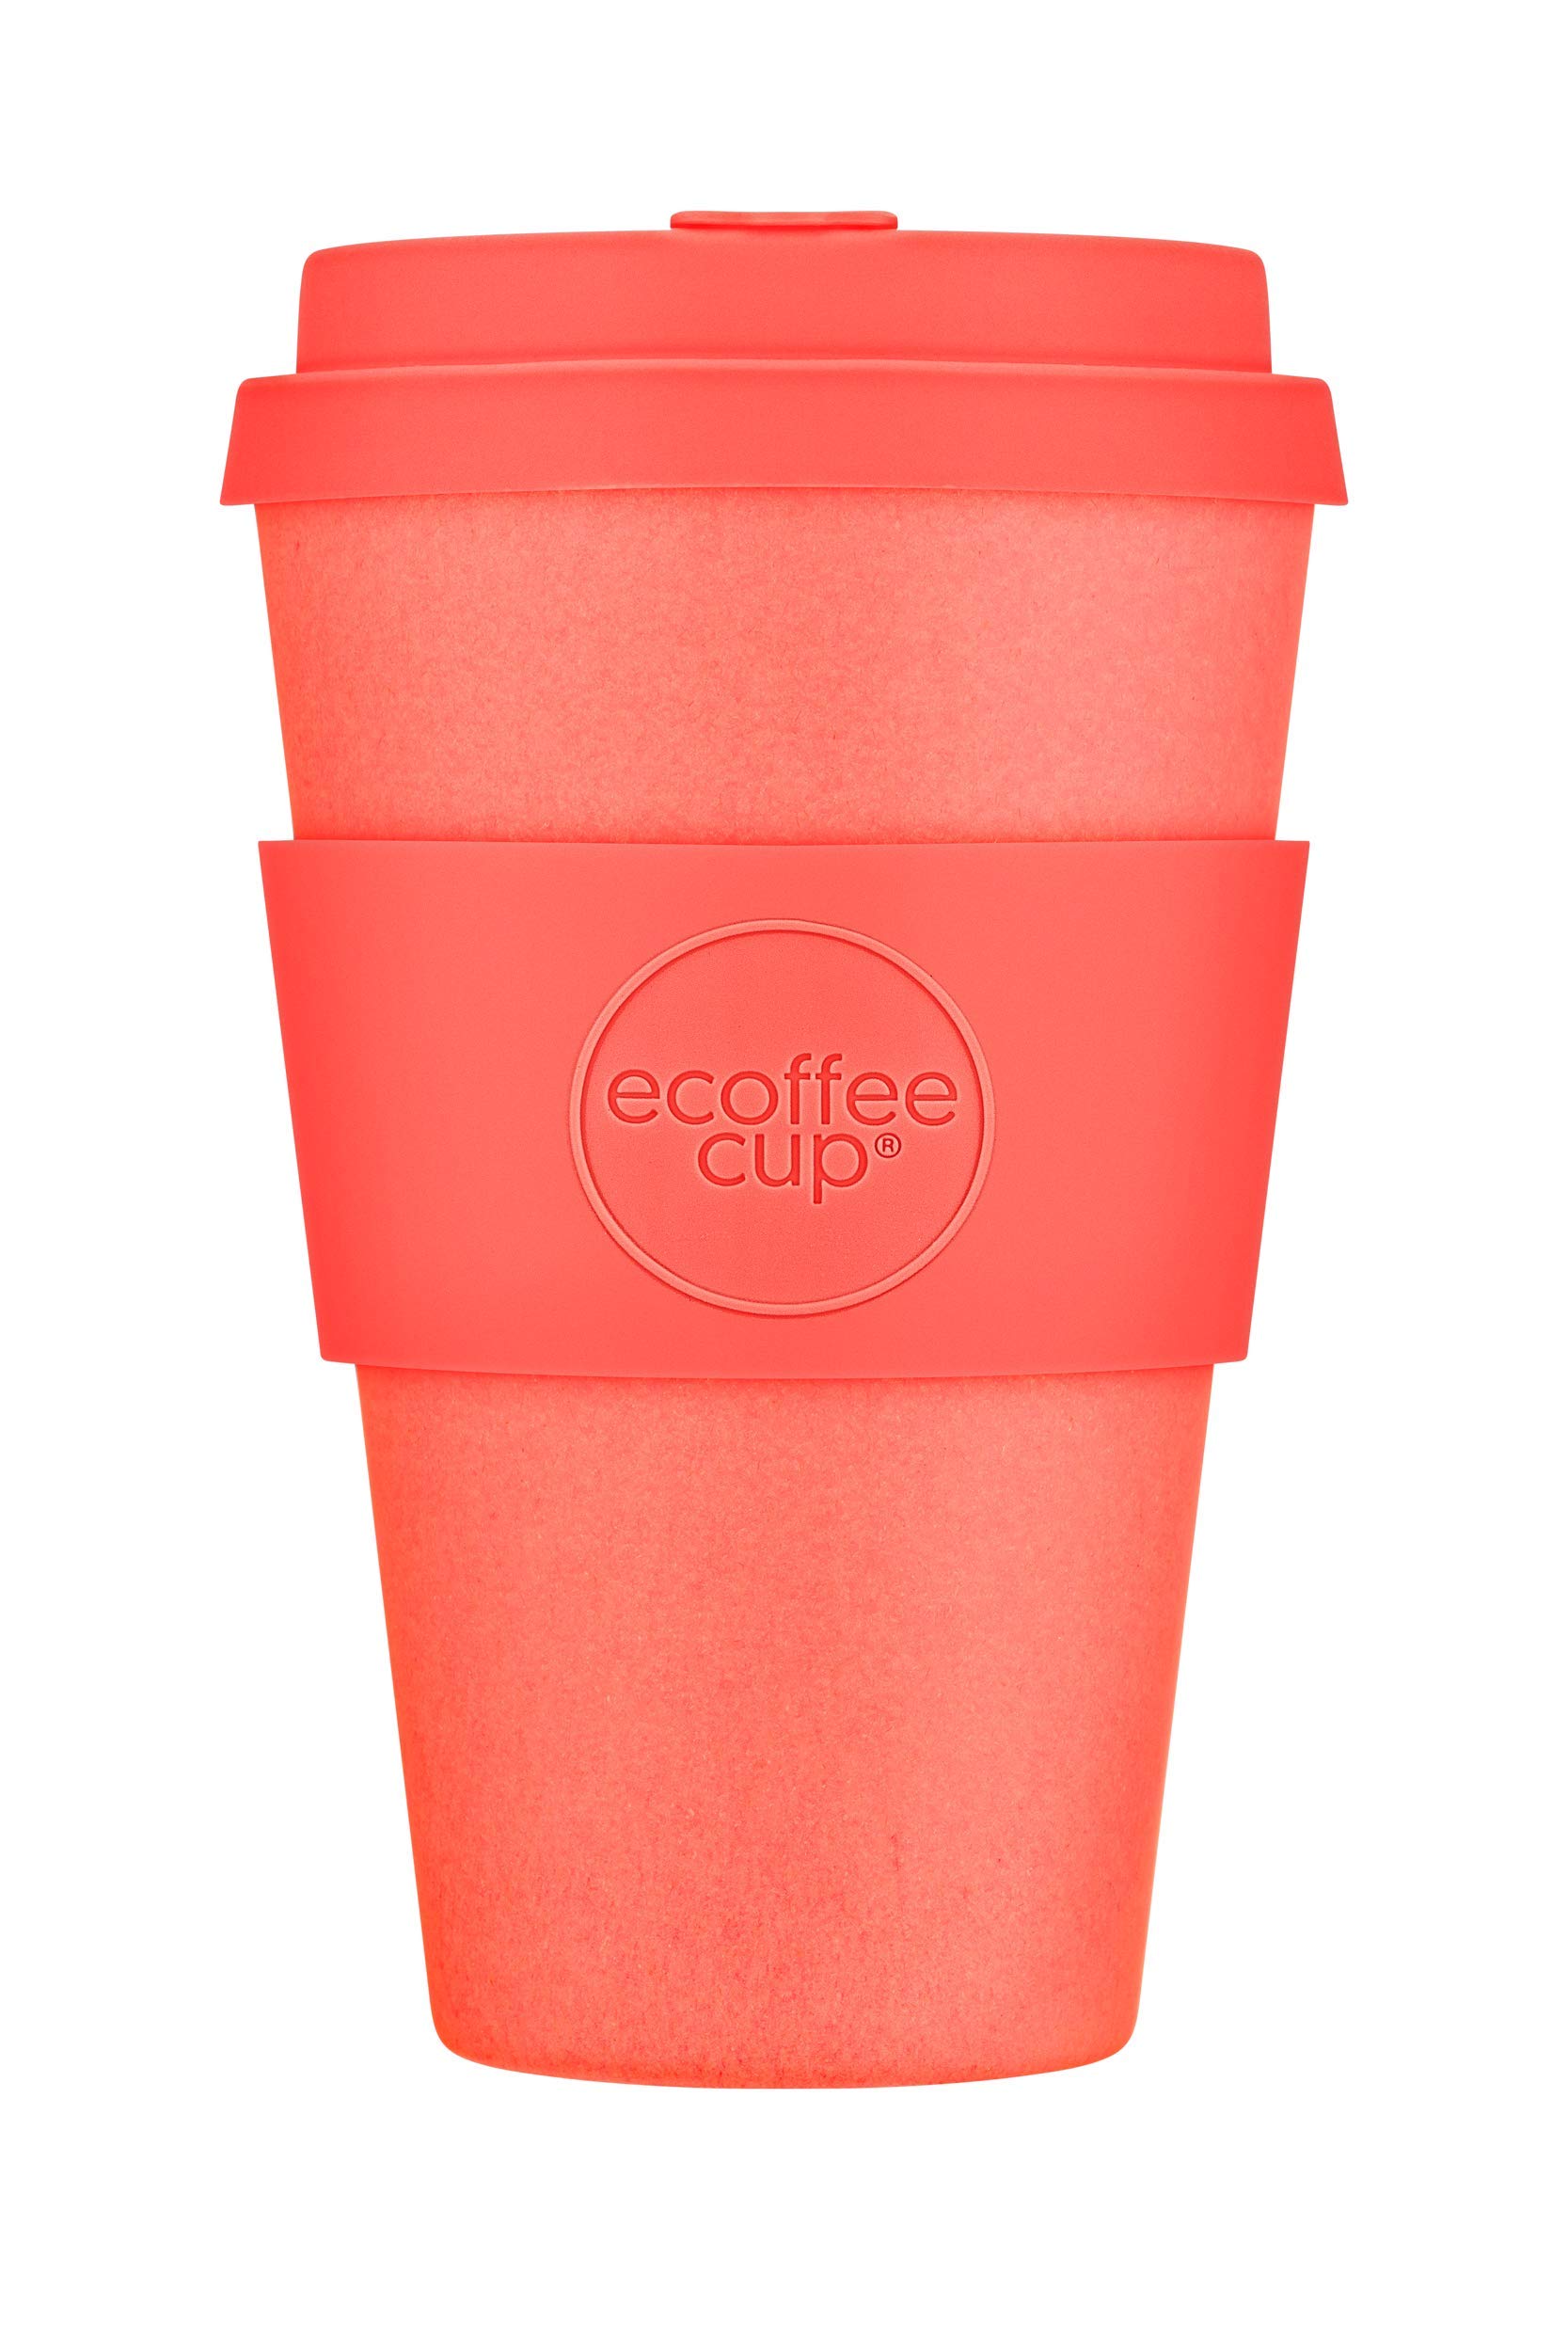 Ecoffee Cup Reusable Sustainable To-go Travel coffee-cup - Ecoffee cup -  Portable cups With No Leak Silicone Lid - Dishwasher Safe (14oz, Mr